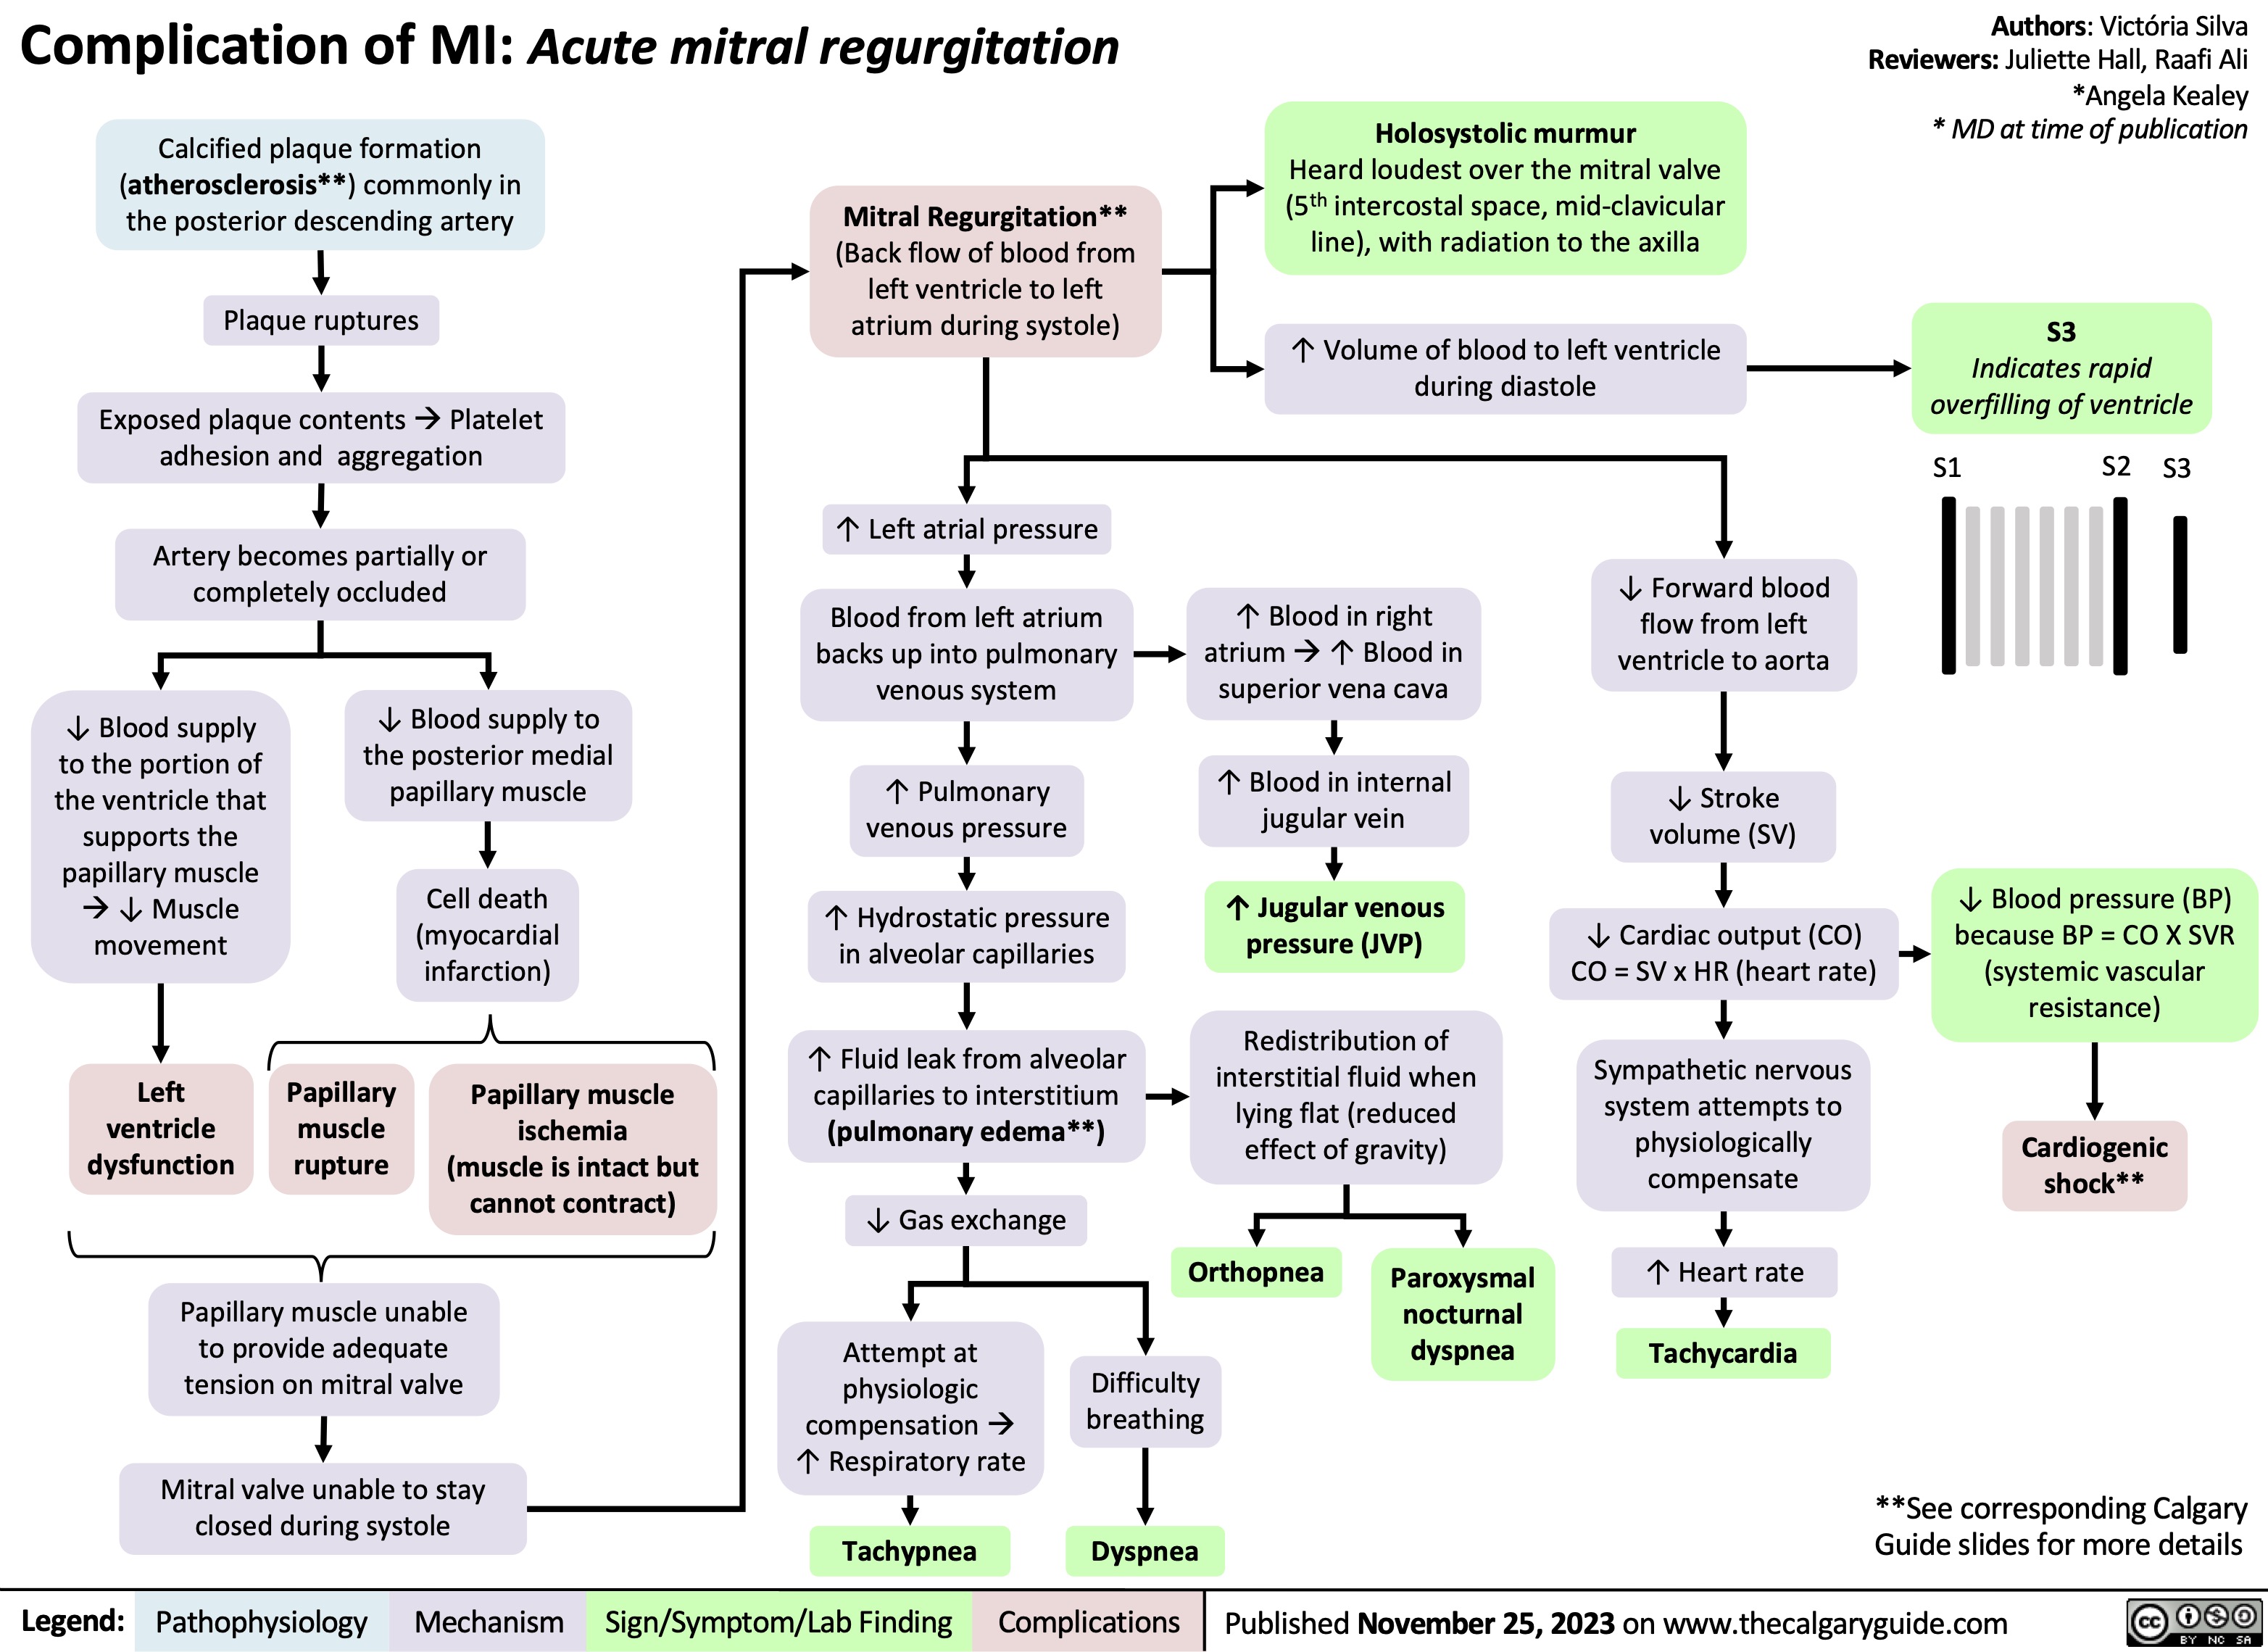 Complication of MI: Acute mitral regurgitation
Authors: Victória Silva Reviewers: Juliette Hall, Raafi Ali *Angela Kealey * MD at time of publication
S3
Indicates rapid overfilling of ventricle
S1 S2 S3
  Calcified plaque formation (atherosclerosis**) commonly in the posterior descending artery
Plaque ruptures
Exposed plaque contentsàPlatelet adhesion and aggregation
Artery becomes partially or completely occluded
Mitral Regurgitation**
(Back flow of blood from left ventricle to left atrium during systole)
↑ Left atrial pressure
Blood from left atrium backs up into pulmonary venous system
↑ Pulmonary venous pressure
↑ Hydrostatic pressure in alveolar capillaries
↑ Fluid leak from alveolar capillaries to interstitium (pulmonary edema**)
↓ Gas exchange
Attempt at
physiologic compensation à ↑ Respiratory rate
Tachypnea
Holosystolic murmur
Heard loudest over the mitral valve (5th intercostal space, mid-clavicular line), with radiation to the axilla
↑ Volume of blood to left ventricle during diastole
                    ↓ Blood supply to the portion of the ventricle that supports the papillary muscle à↓ Muscle movement
Left ventricle dysfunction
↓ Blood supply to the posterior medial papillary muscle
Cell death (myocardial infarction)
Papillary muscle ischemia (muscle is intact but cannot contract)
↑ Blood in right atriumà↑ Blood in superior vena cava
↑ Blood in internal jugular vein
↑ Jugular venous pressure (JVP)
Redistribution of interstitial fluid when lying flat (reduced effect of gravity)
↓ Forward blood flow from left ventricle to aorta
↓ Stroke volume (SV)
↓ Cardiac output (CO) CO = SV x HR (heart rate)
Sympathetic nervous system attempts to physiologically compensate
↑ Heart rate
Tachycardia
↓ Blood pressure (BP) because BP = CO X SVR (systemic vascular resistance)
Cardiogenic shock**
               Papillary muscle rupture
         Papillary muscle unable to provide adequate tension on mitral valve
Mitral valve unable to stay closed during systole
Orthopnea
Difficulty breathing
Dyspnea
Paroxysmal nocturnal dyspnea
    **See corresponding Calgary Guide slides for more details
   Legend:
 Pathophysiology
Mechanism
 Sign/Symptom/Lab Finding
 Complications
 Published November 25, 2023 on www.thecalgaryguide.com
  